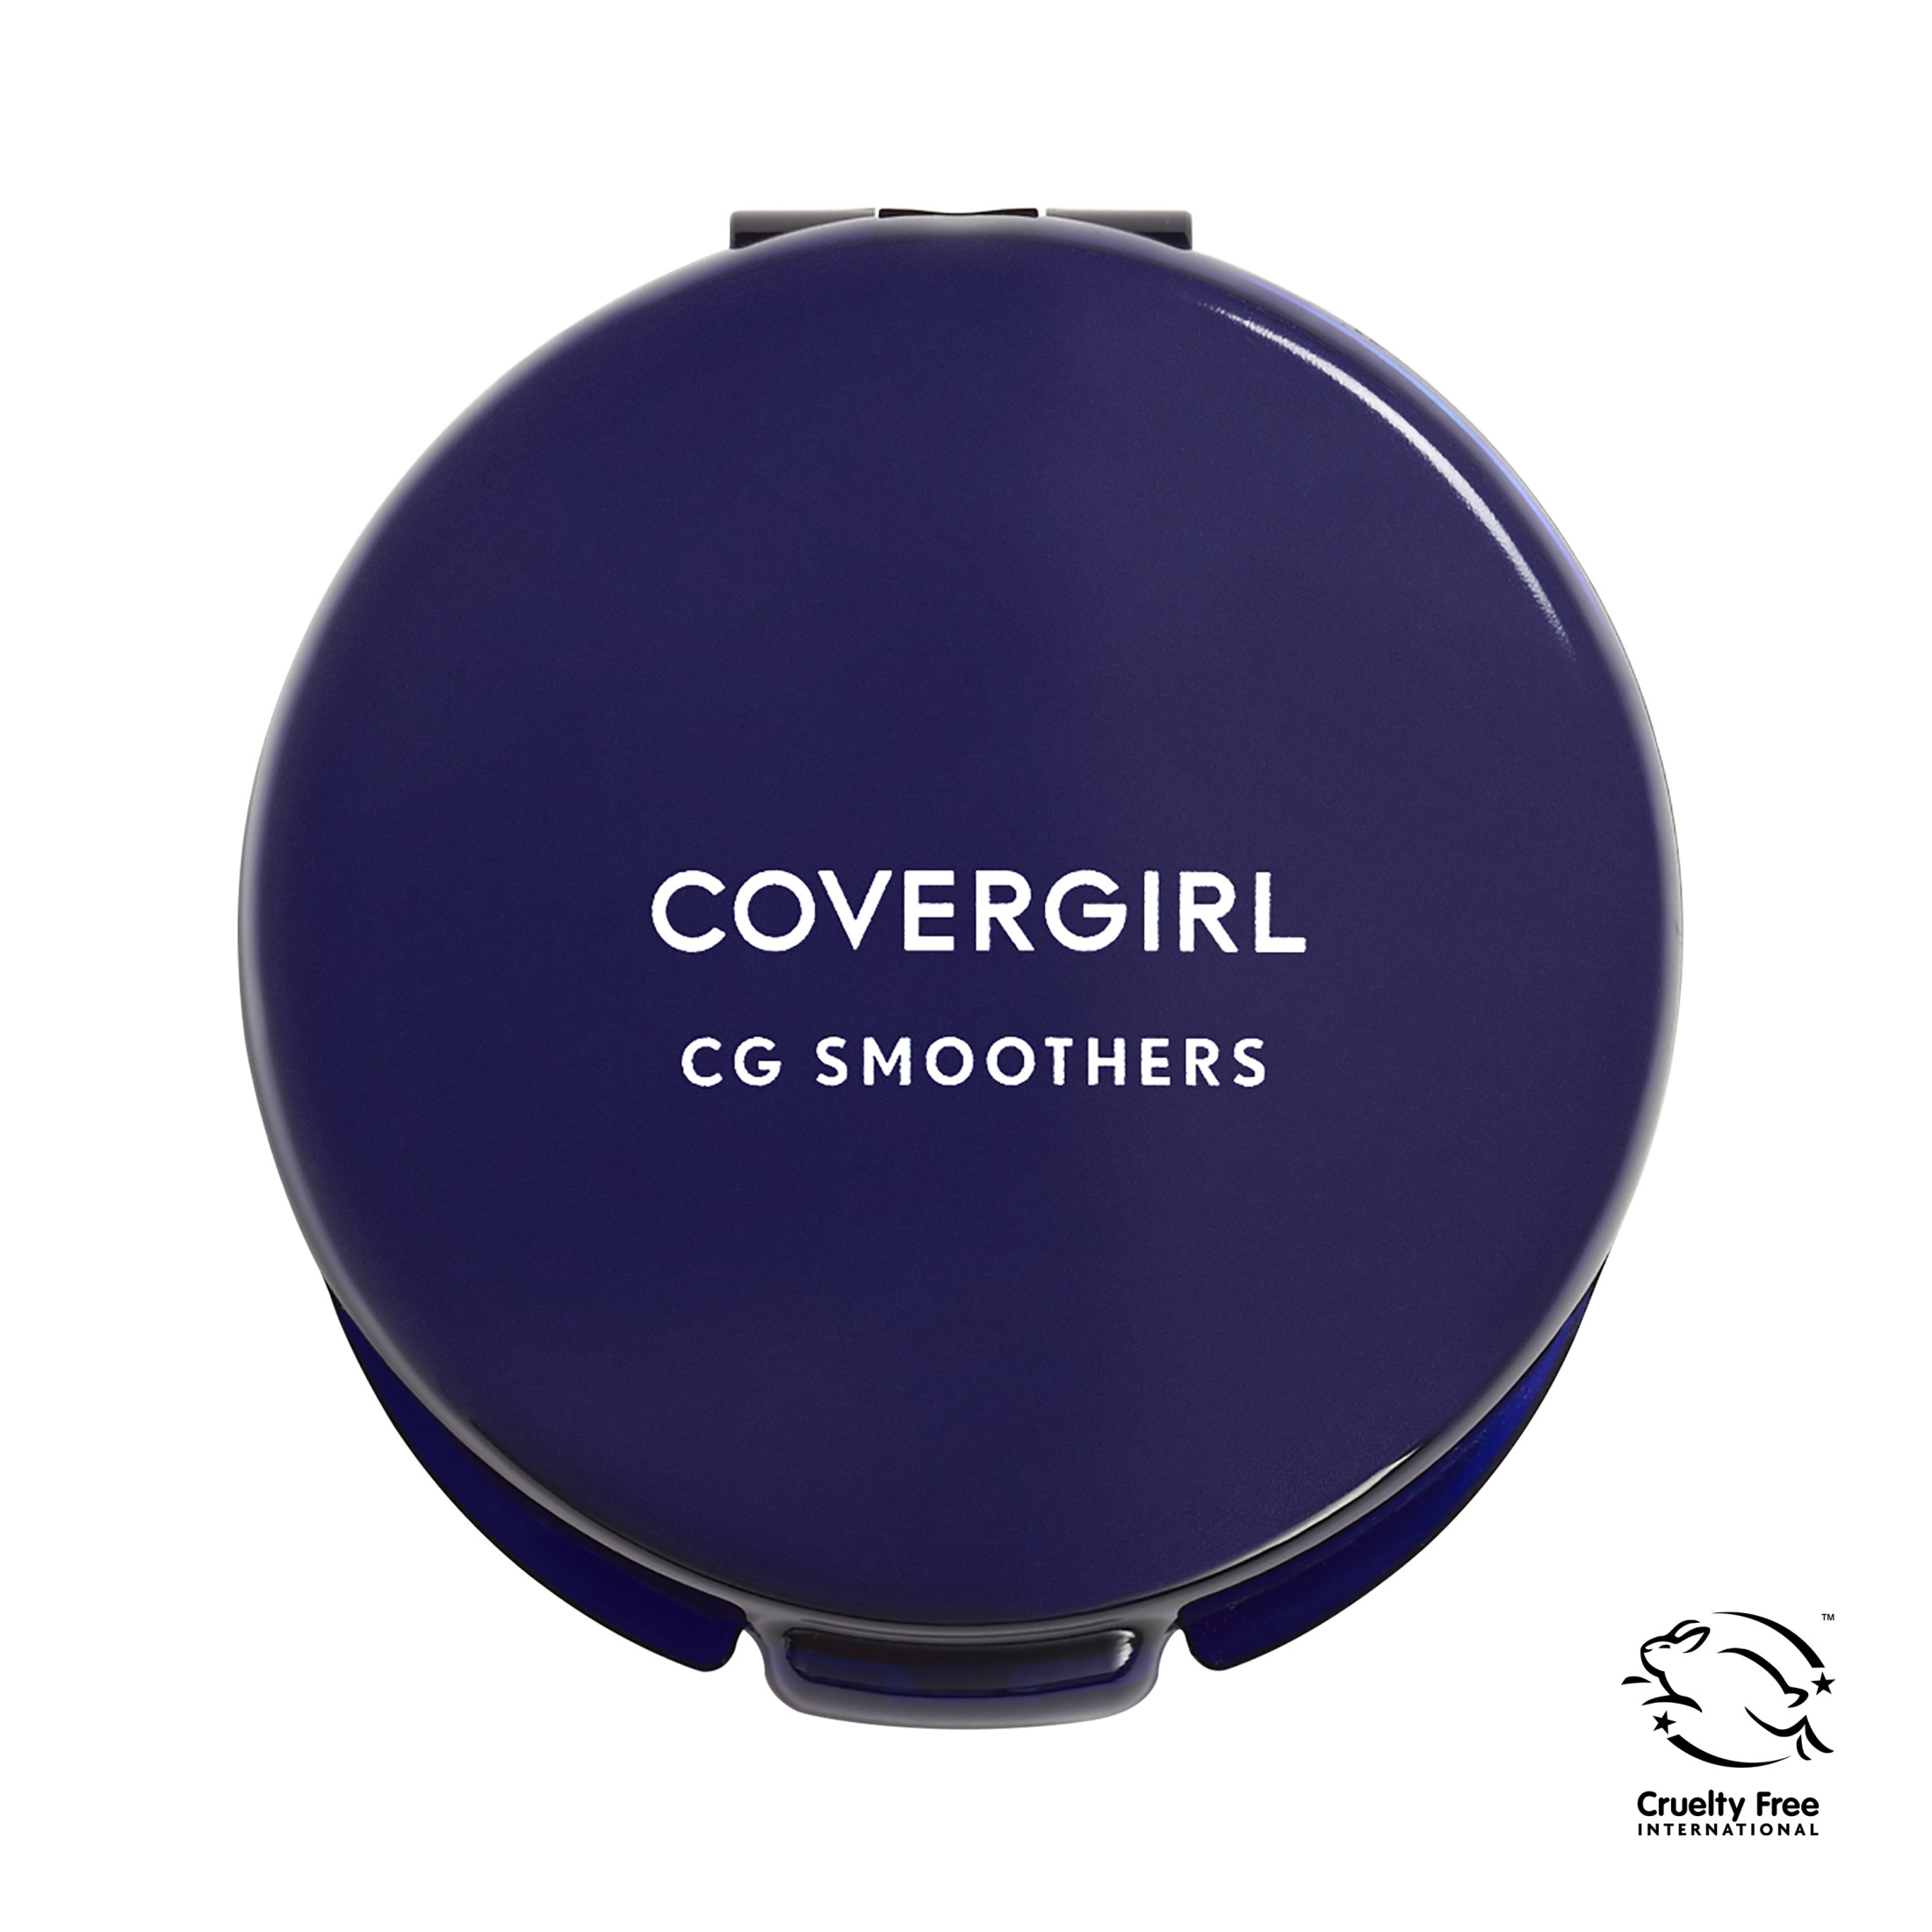 COVERGIRL Smoothers Pressed Powder, 710 Translucent Light, 0.32 oz - image 4 of 9